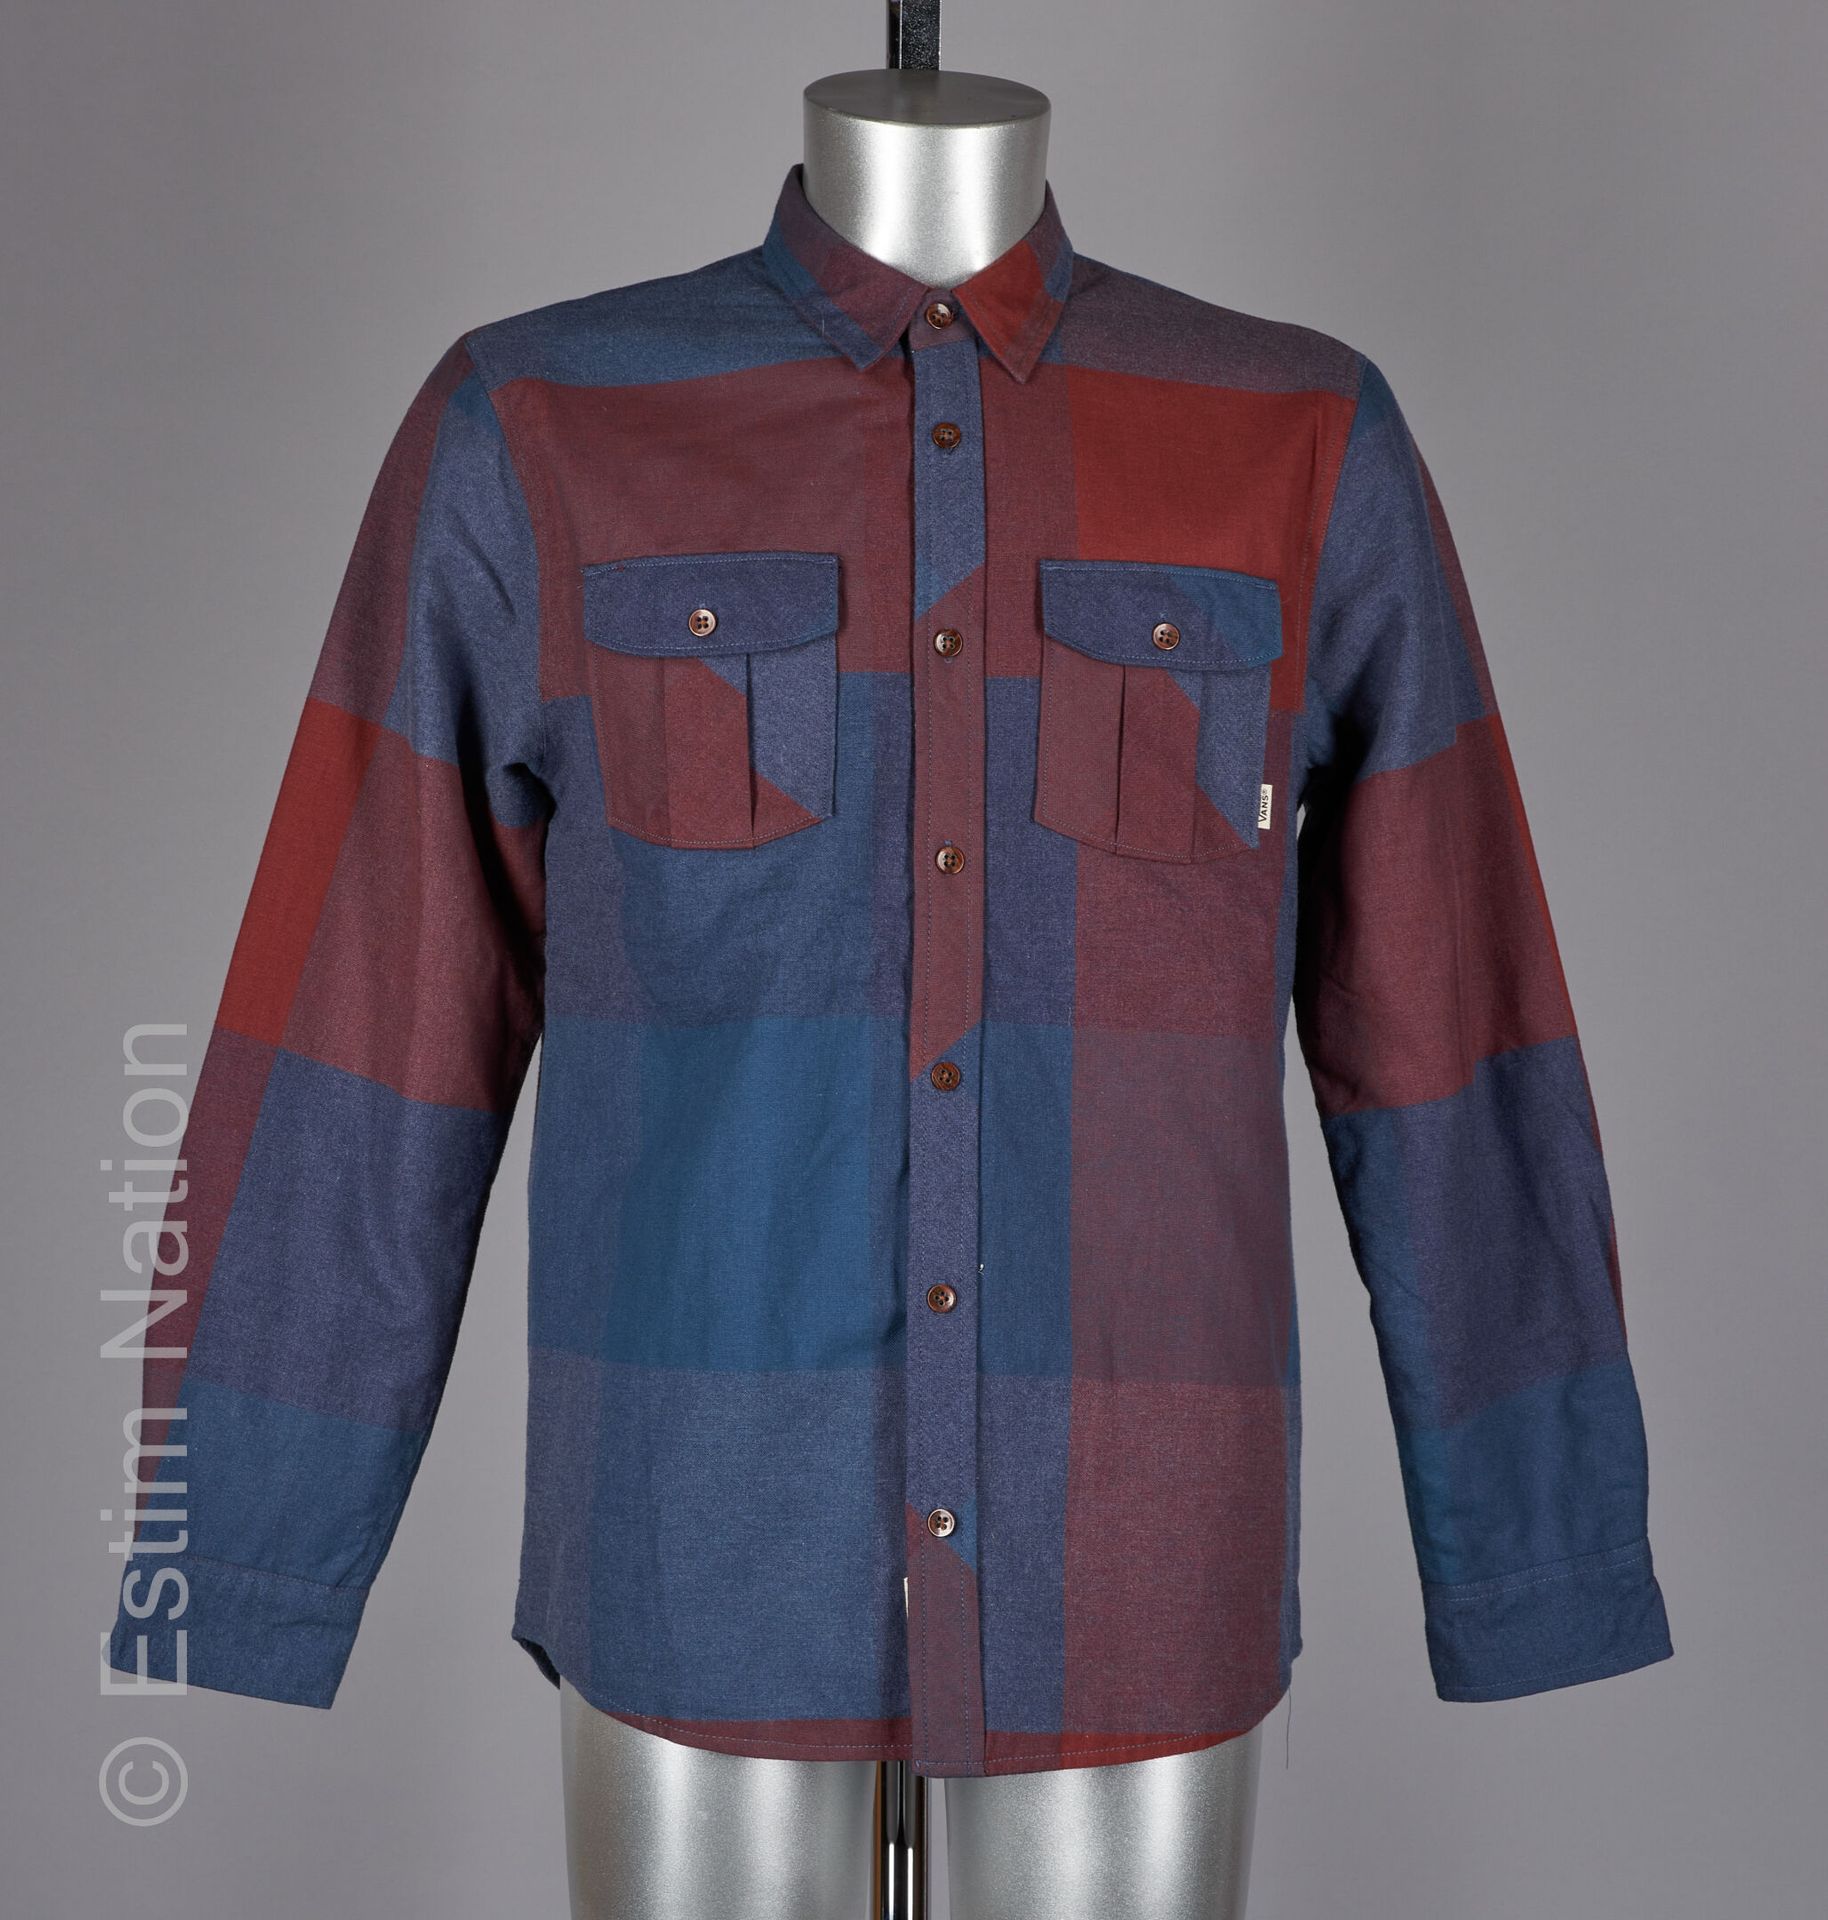 VAN'S Woven cotton overshirt with a lightly padded interior (T M)